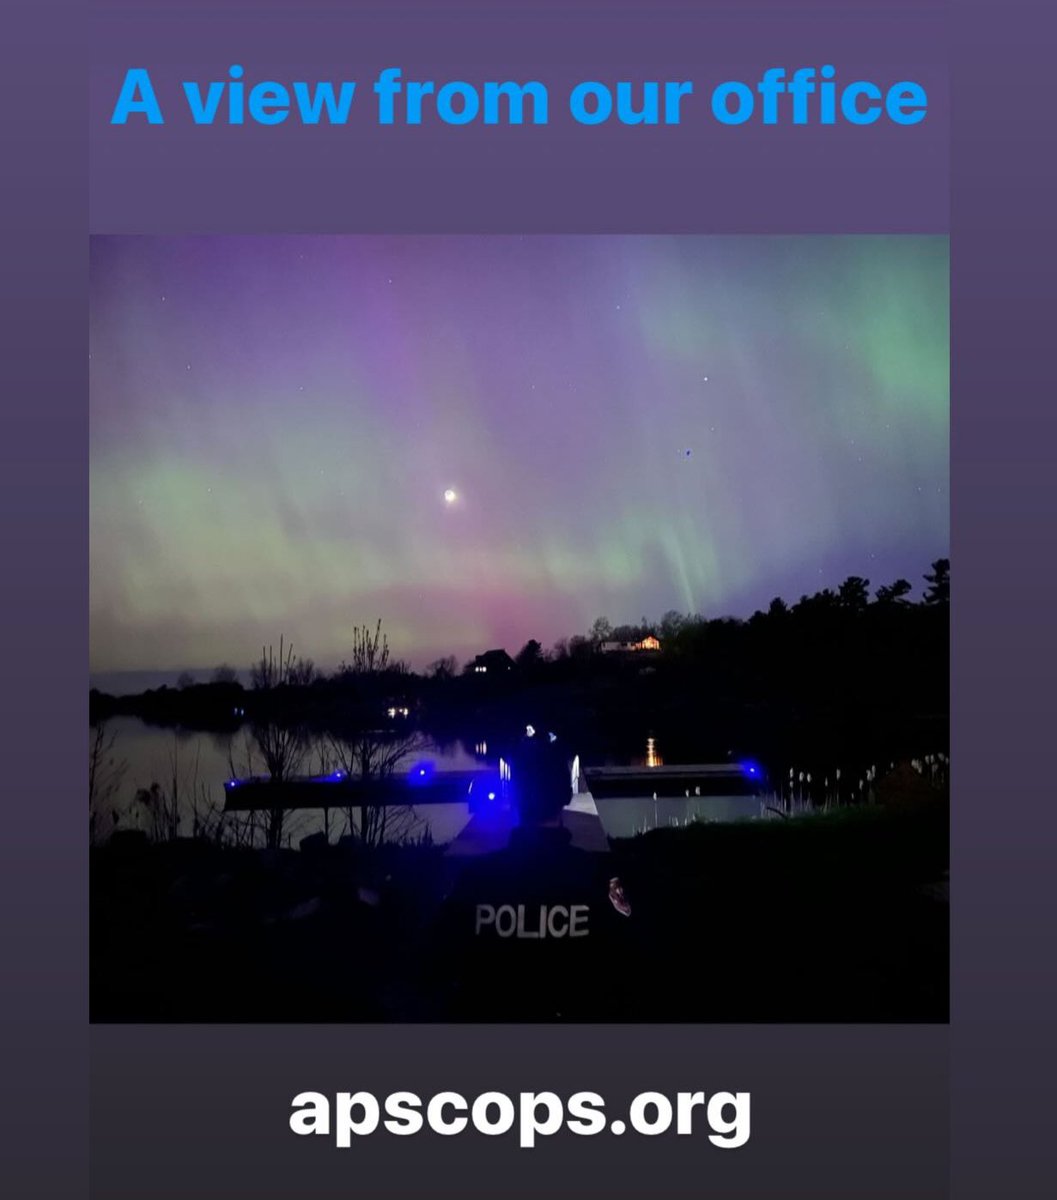 It doesn’t get much better than this. We are actively seeking new recruits and experienced officers. Visit apscops.org and apply today! #apscops #recruitment #officeview #indigenouspolicing